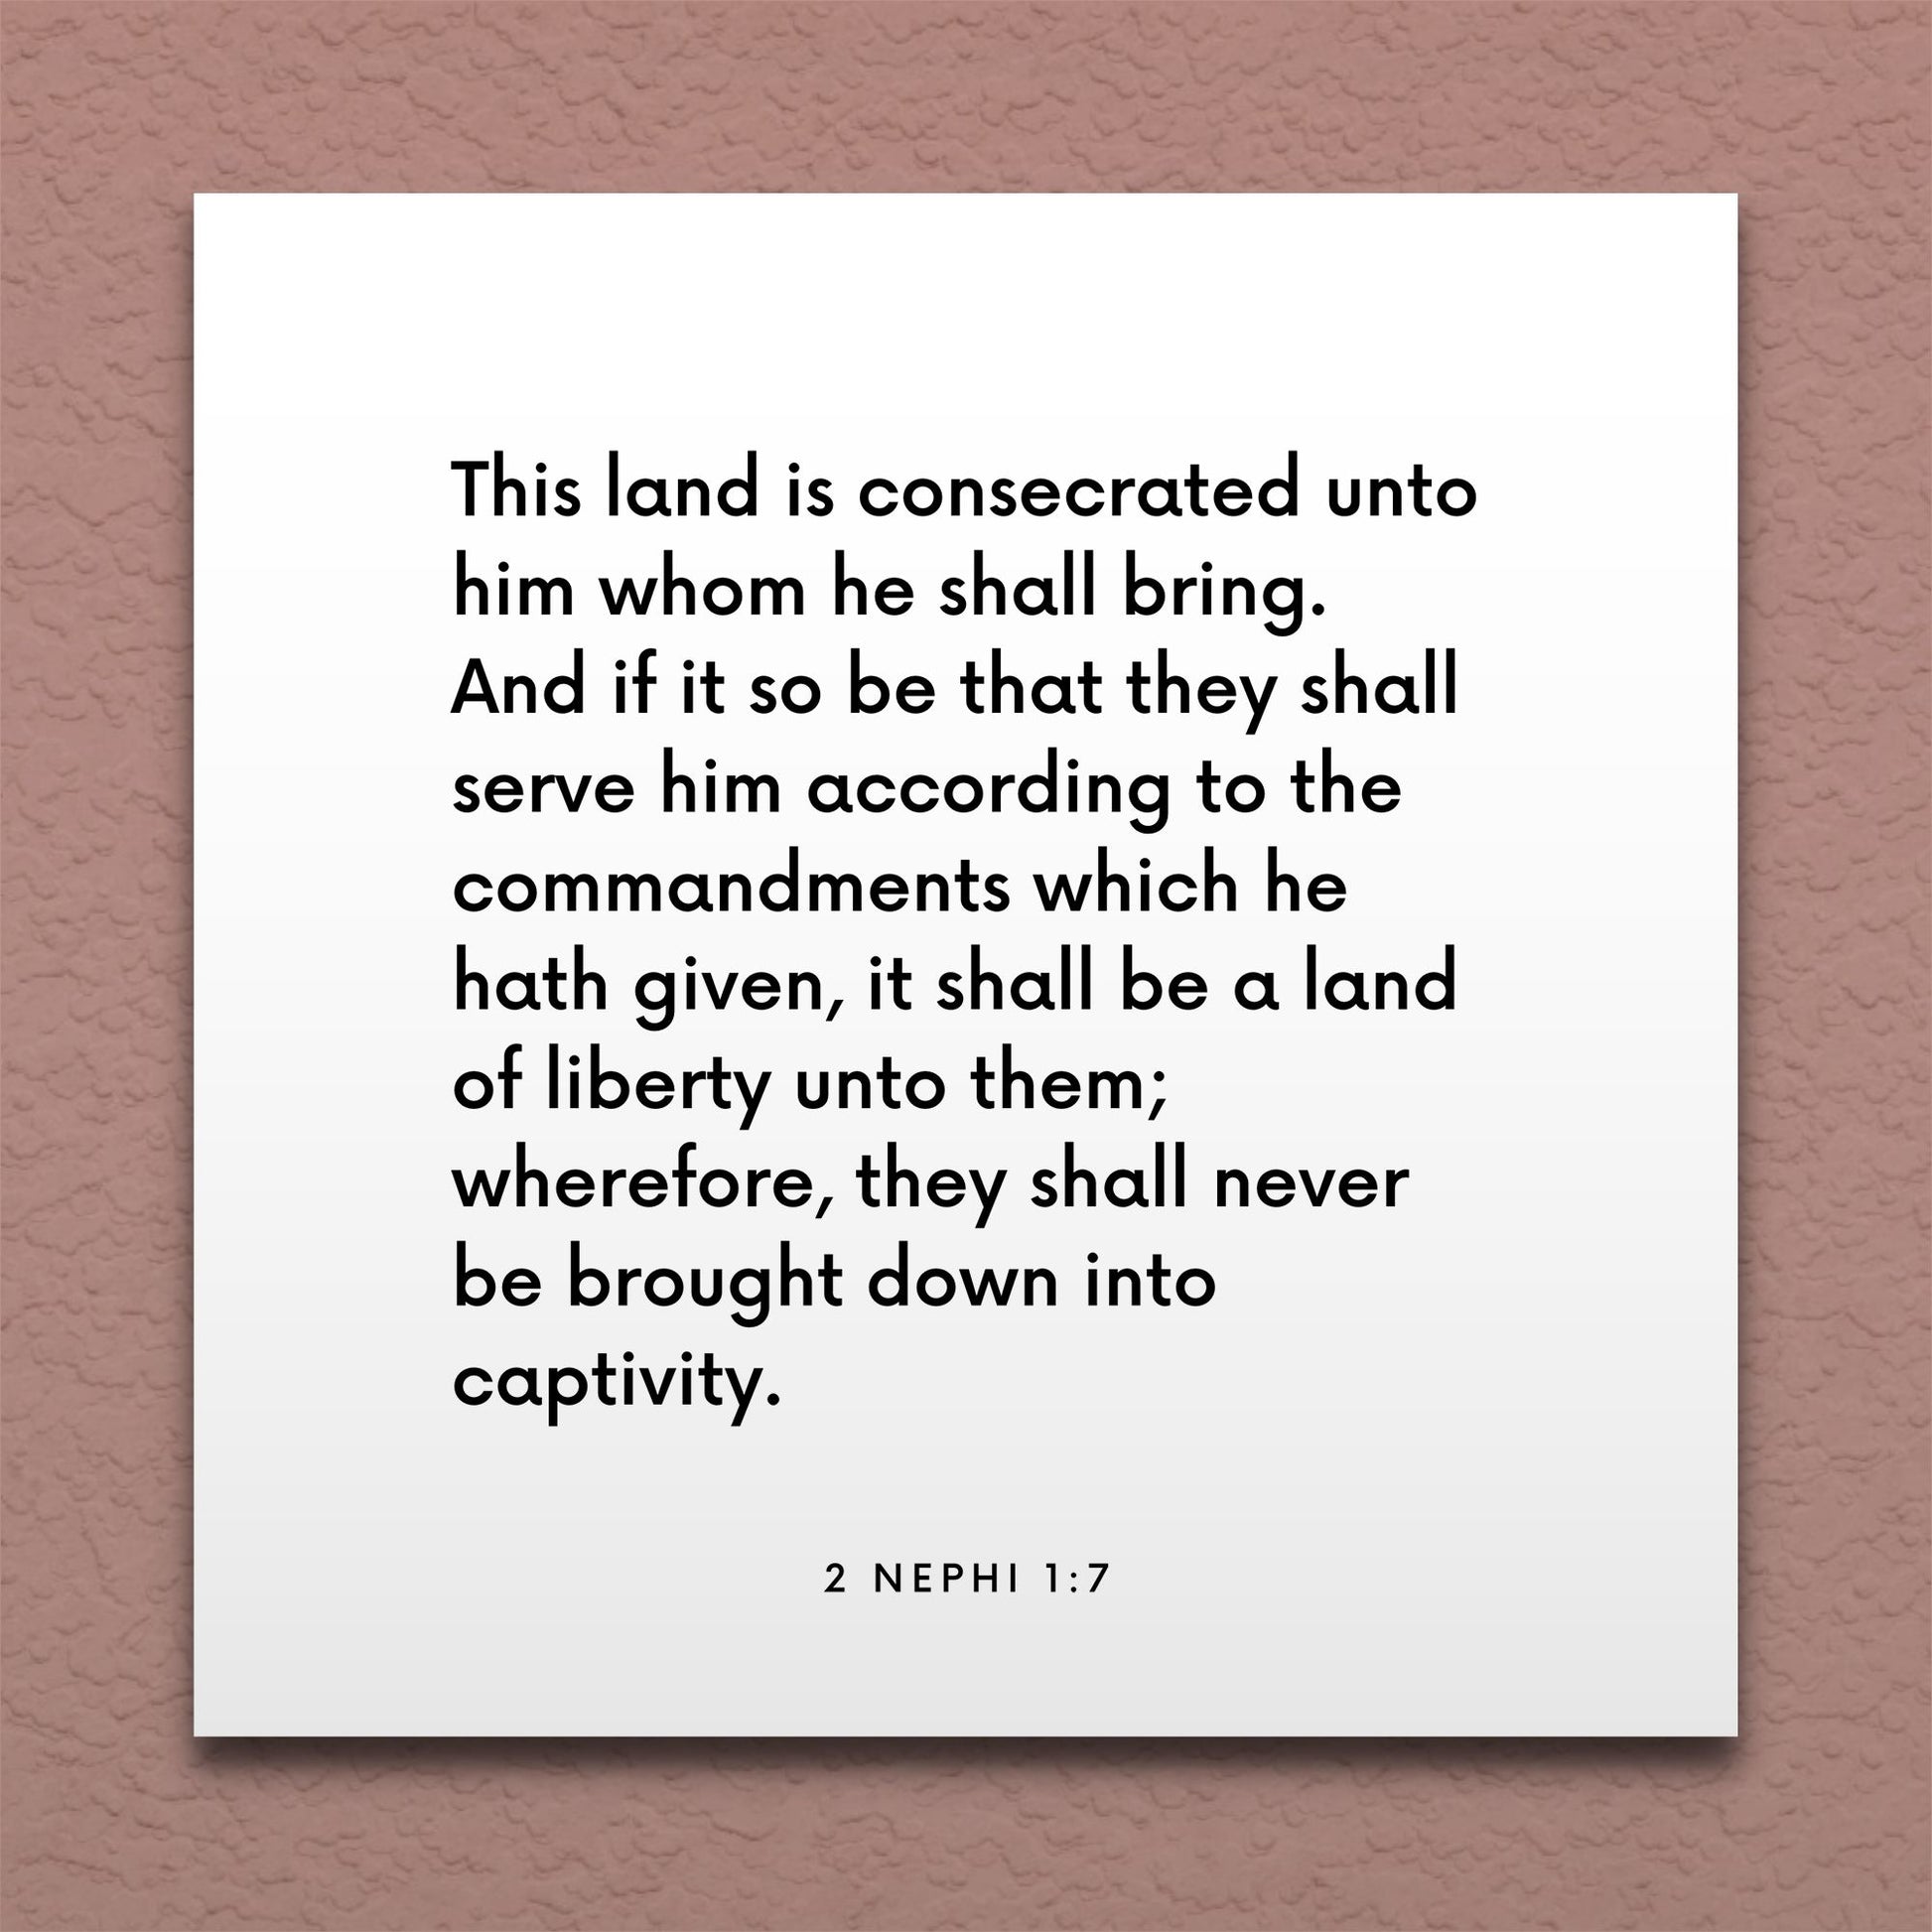 Wall-mounted scripture tile for 2 Nephi 1:7 - "This land is consecrated unto him whom he shall bring"